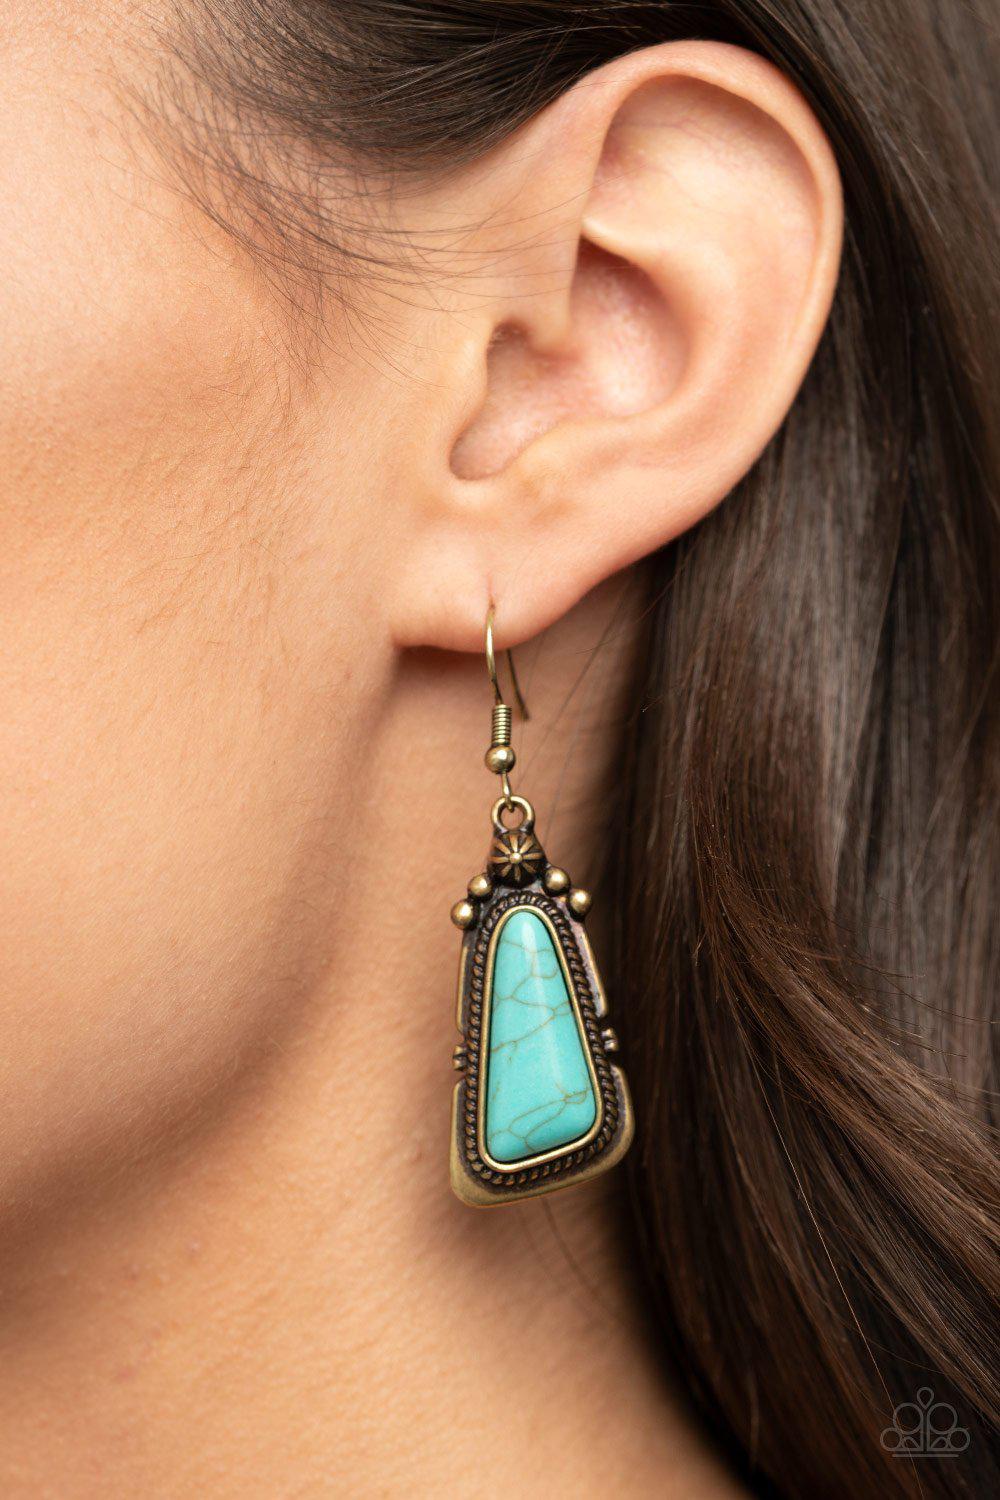 Sahara Solitude Brass and Turquoise Blue Stone Earrings - Paparazzi Accessories - model -CarasShop.com - $5 Jewelry by Cara Jewels